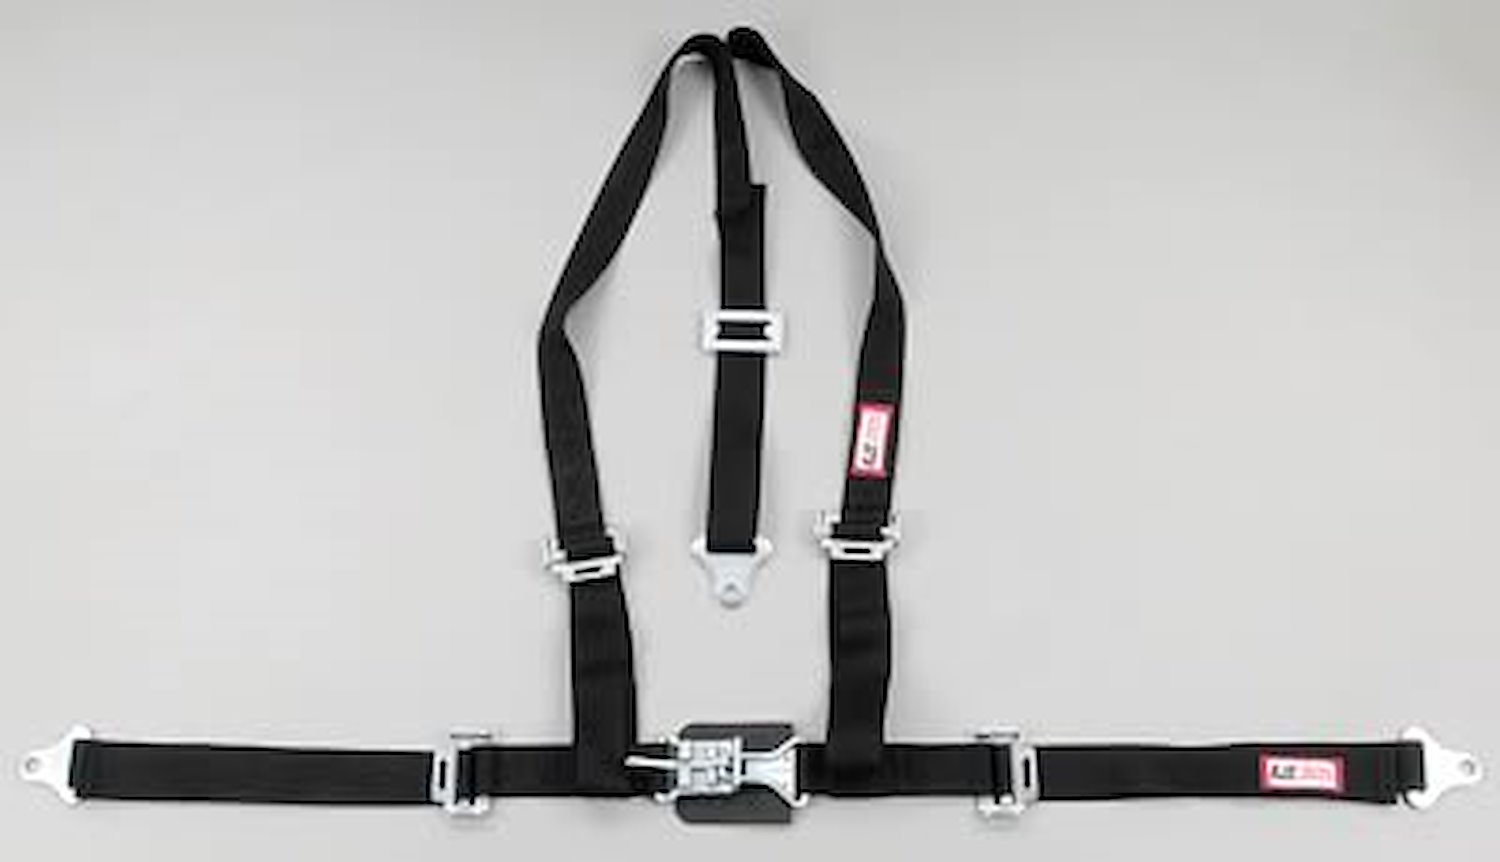 NON-SFI L&L HARNESS 3 PULL DOWN Lap Belt SNAP SEWN IN 2 S.H. Individual ROLL BAR Mount WRAP/SNAP RED